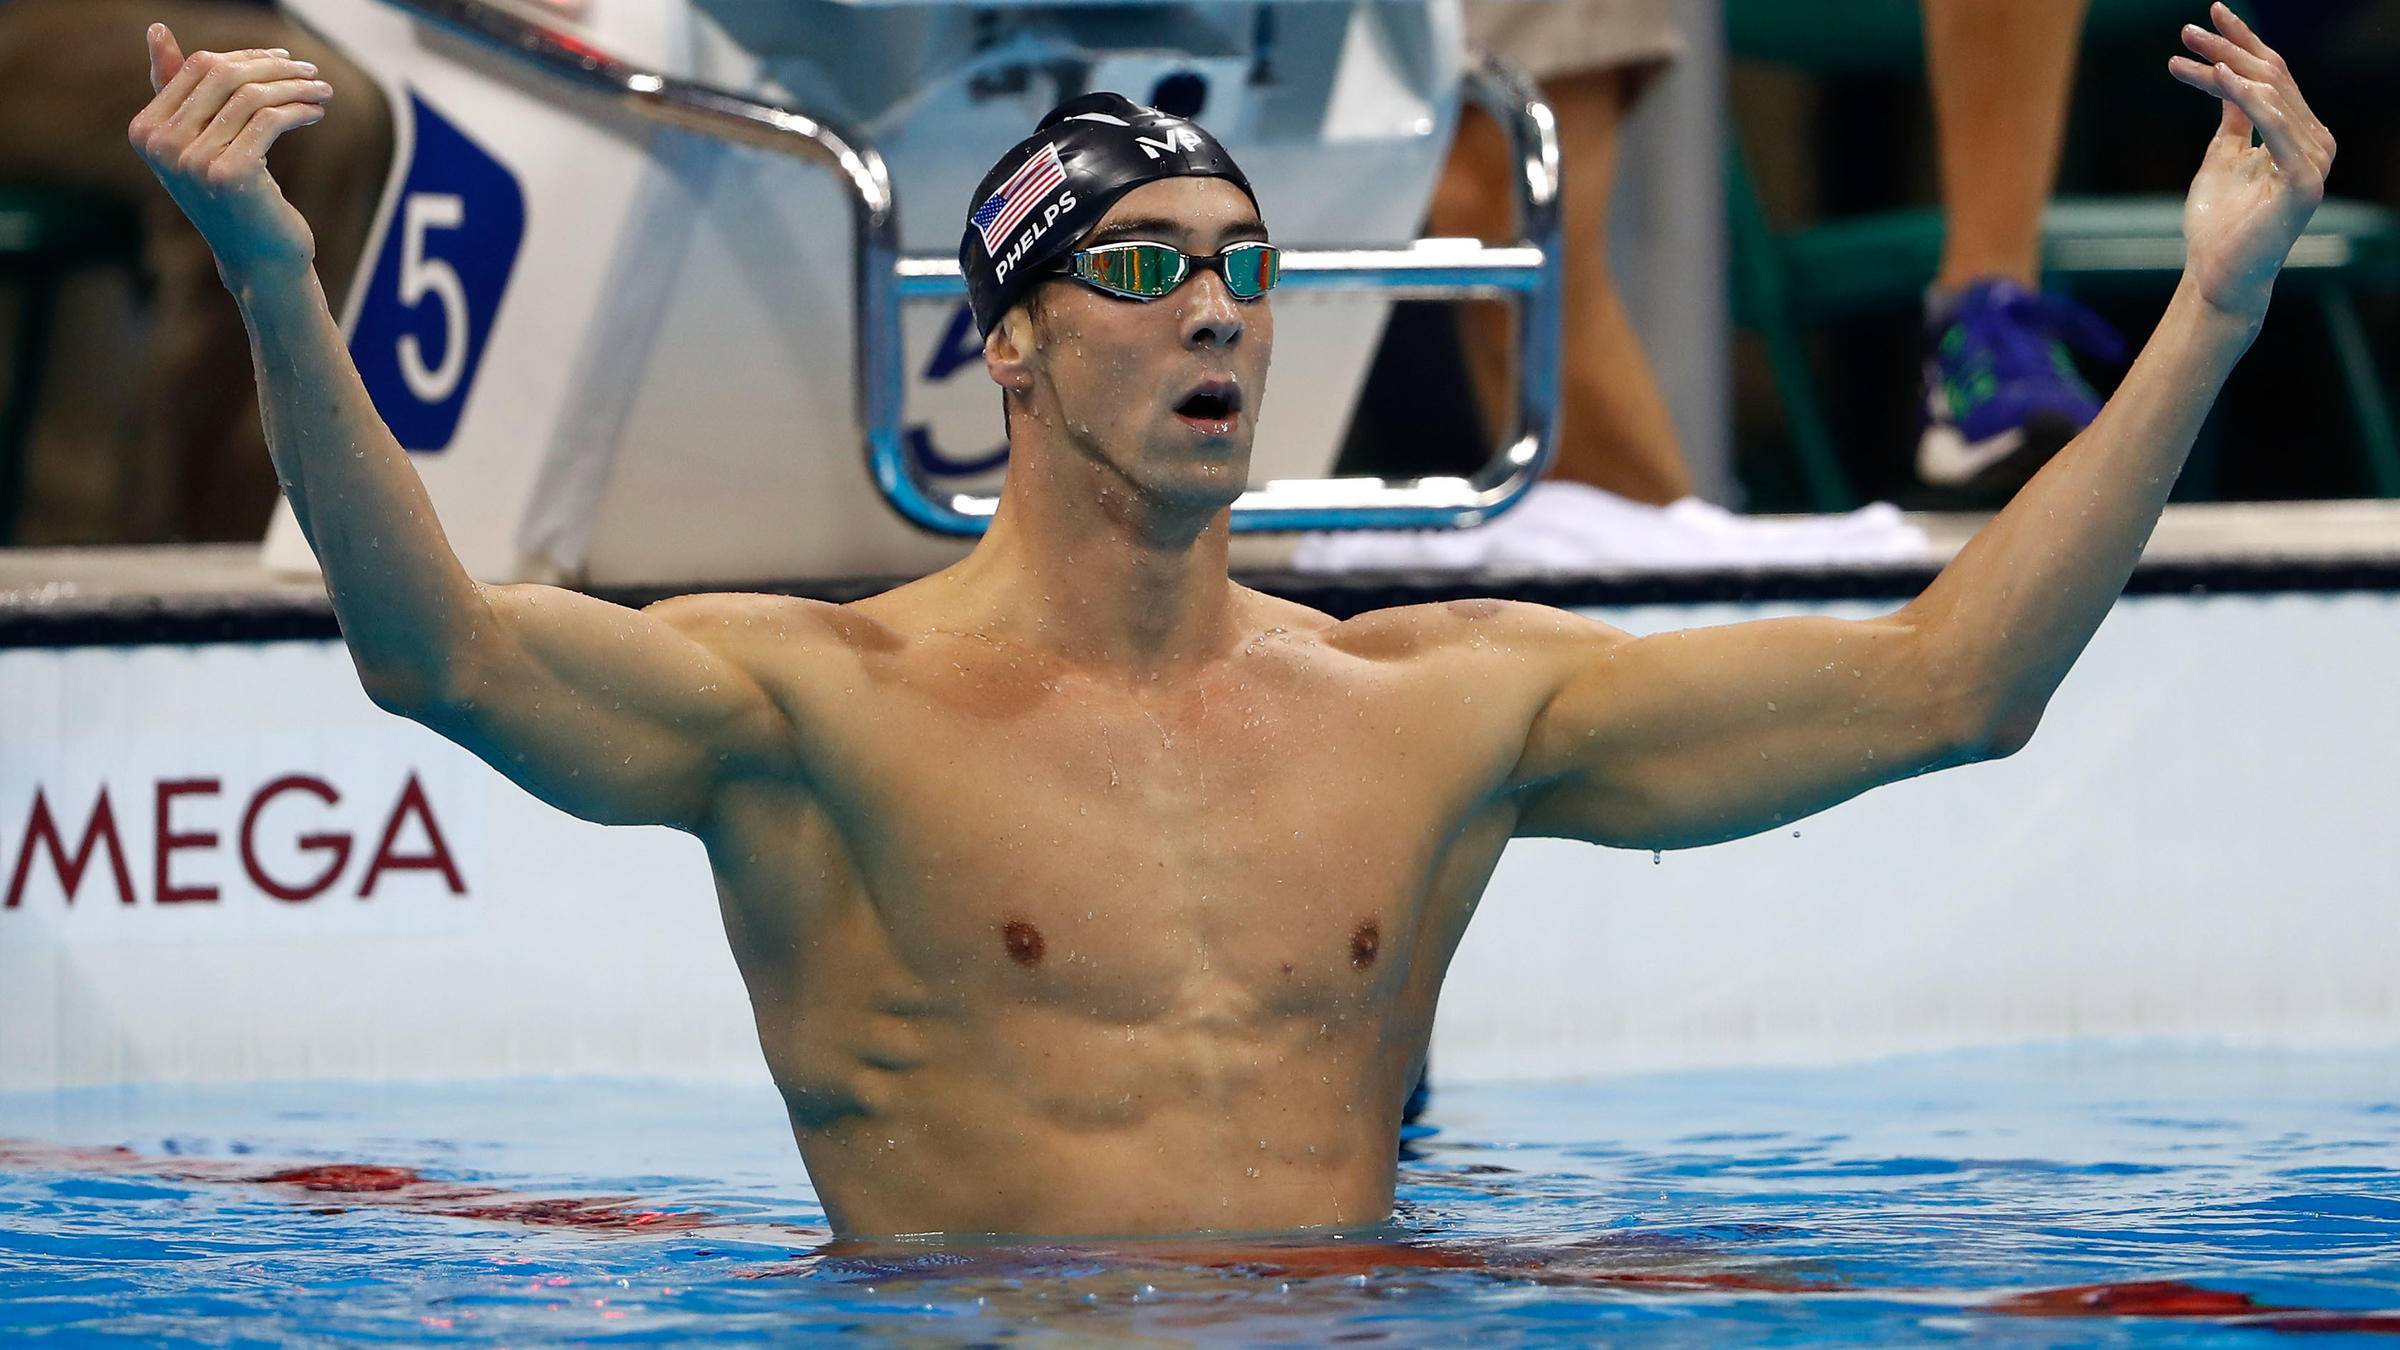 Michael Phelps Wins 25th Olympic Medal; He And Katie Ledecky Add To